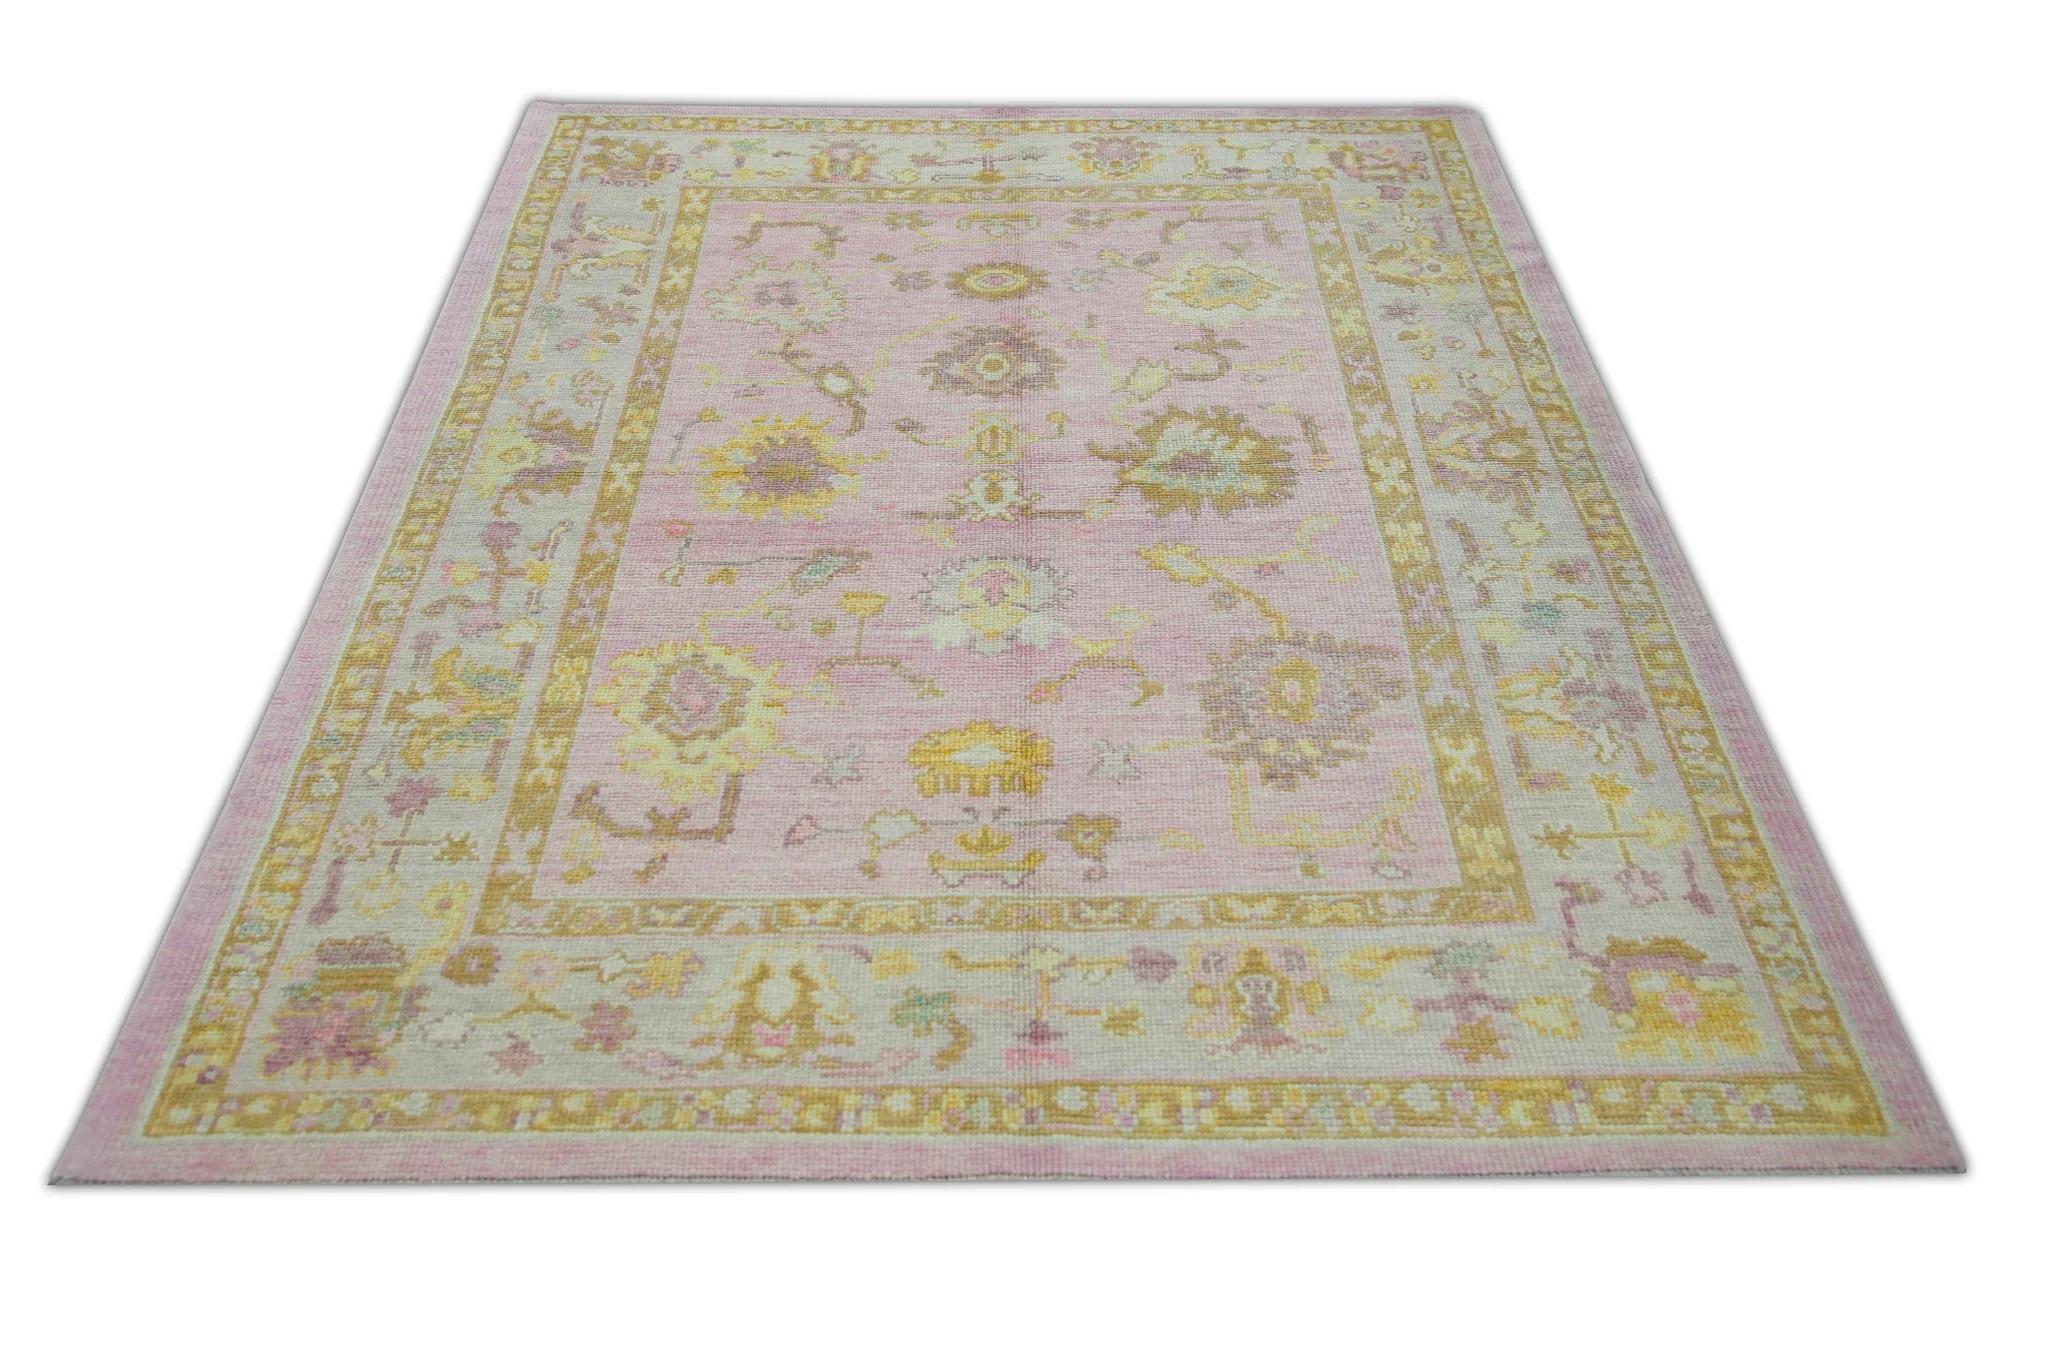 Contemporary Floral Handwoven Wool Turkish Oushak Rug in Soft Pink and Yellow 5'3